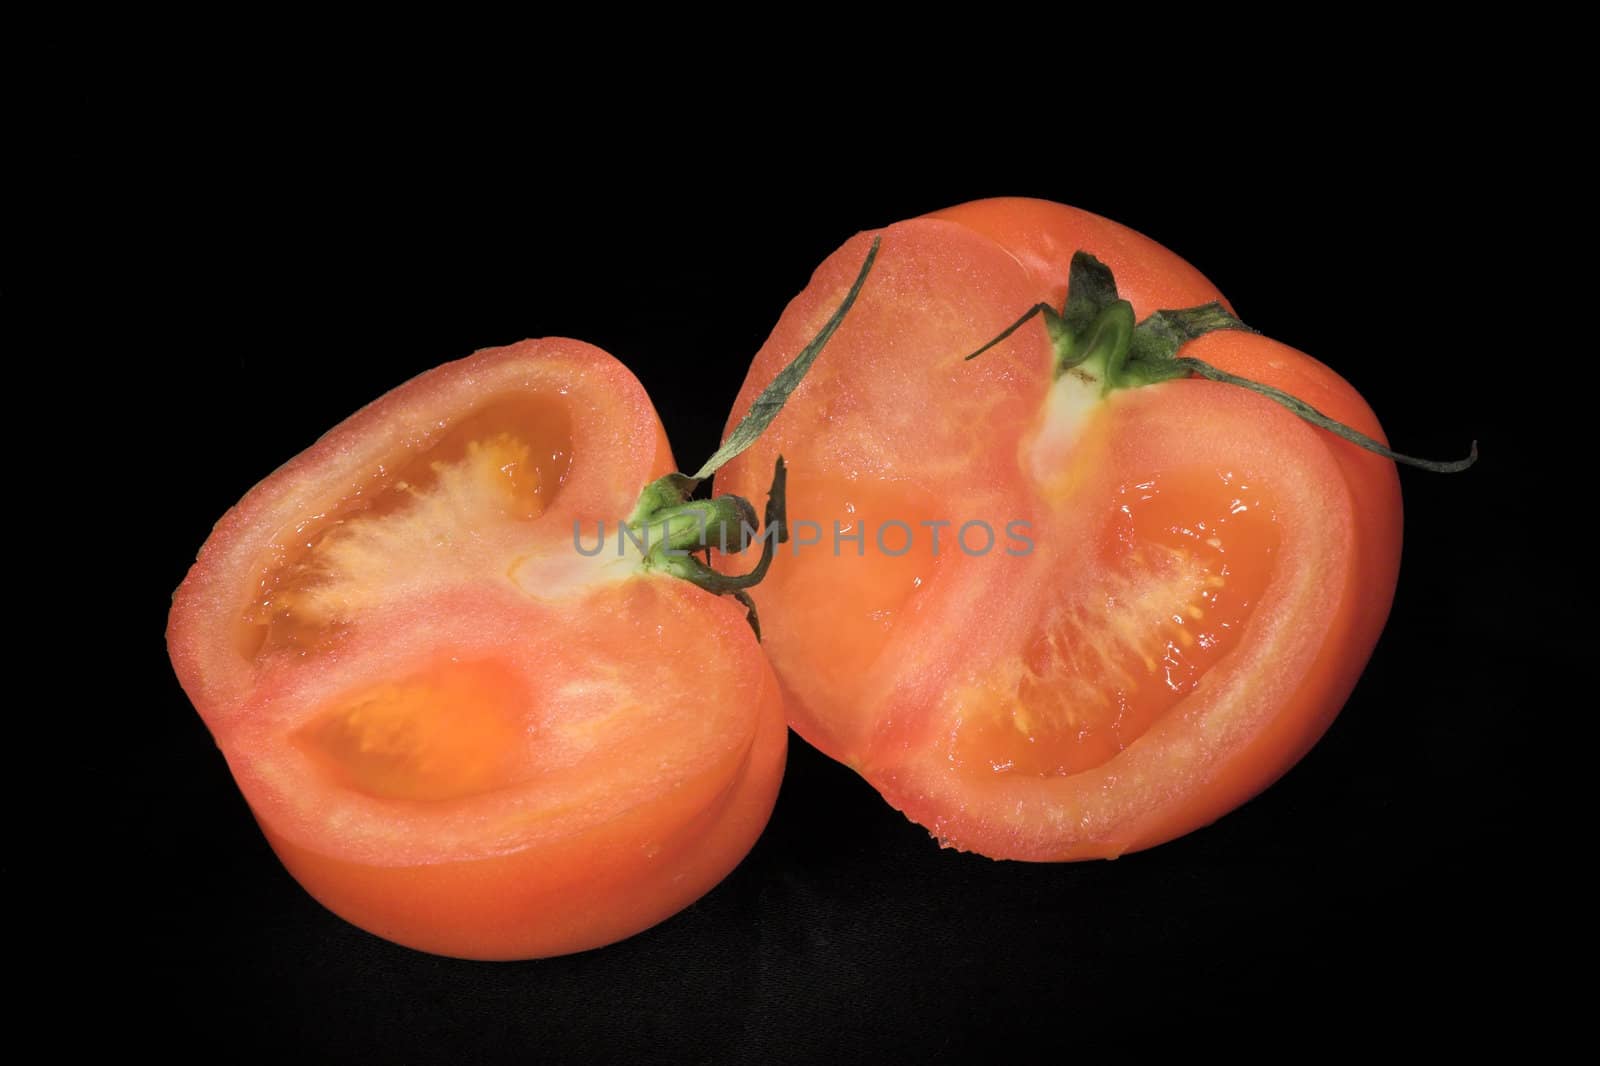 Two parts of the red cut tomato on a black background